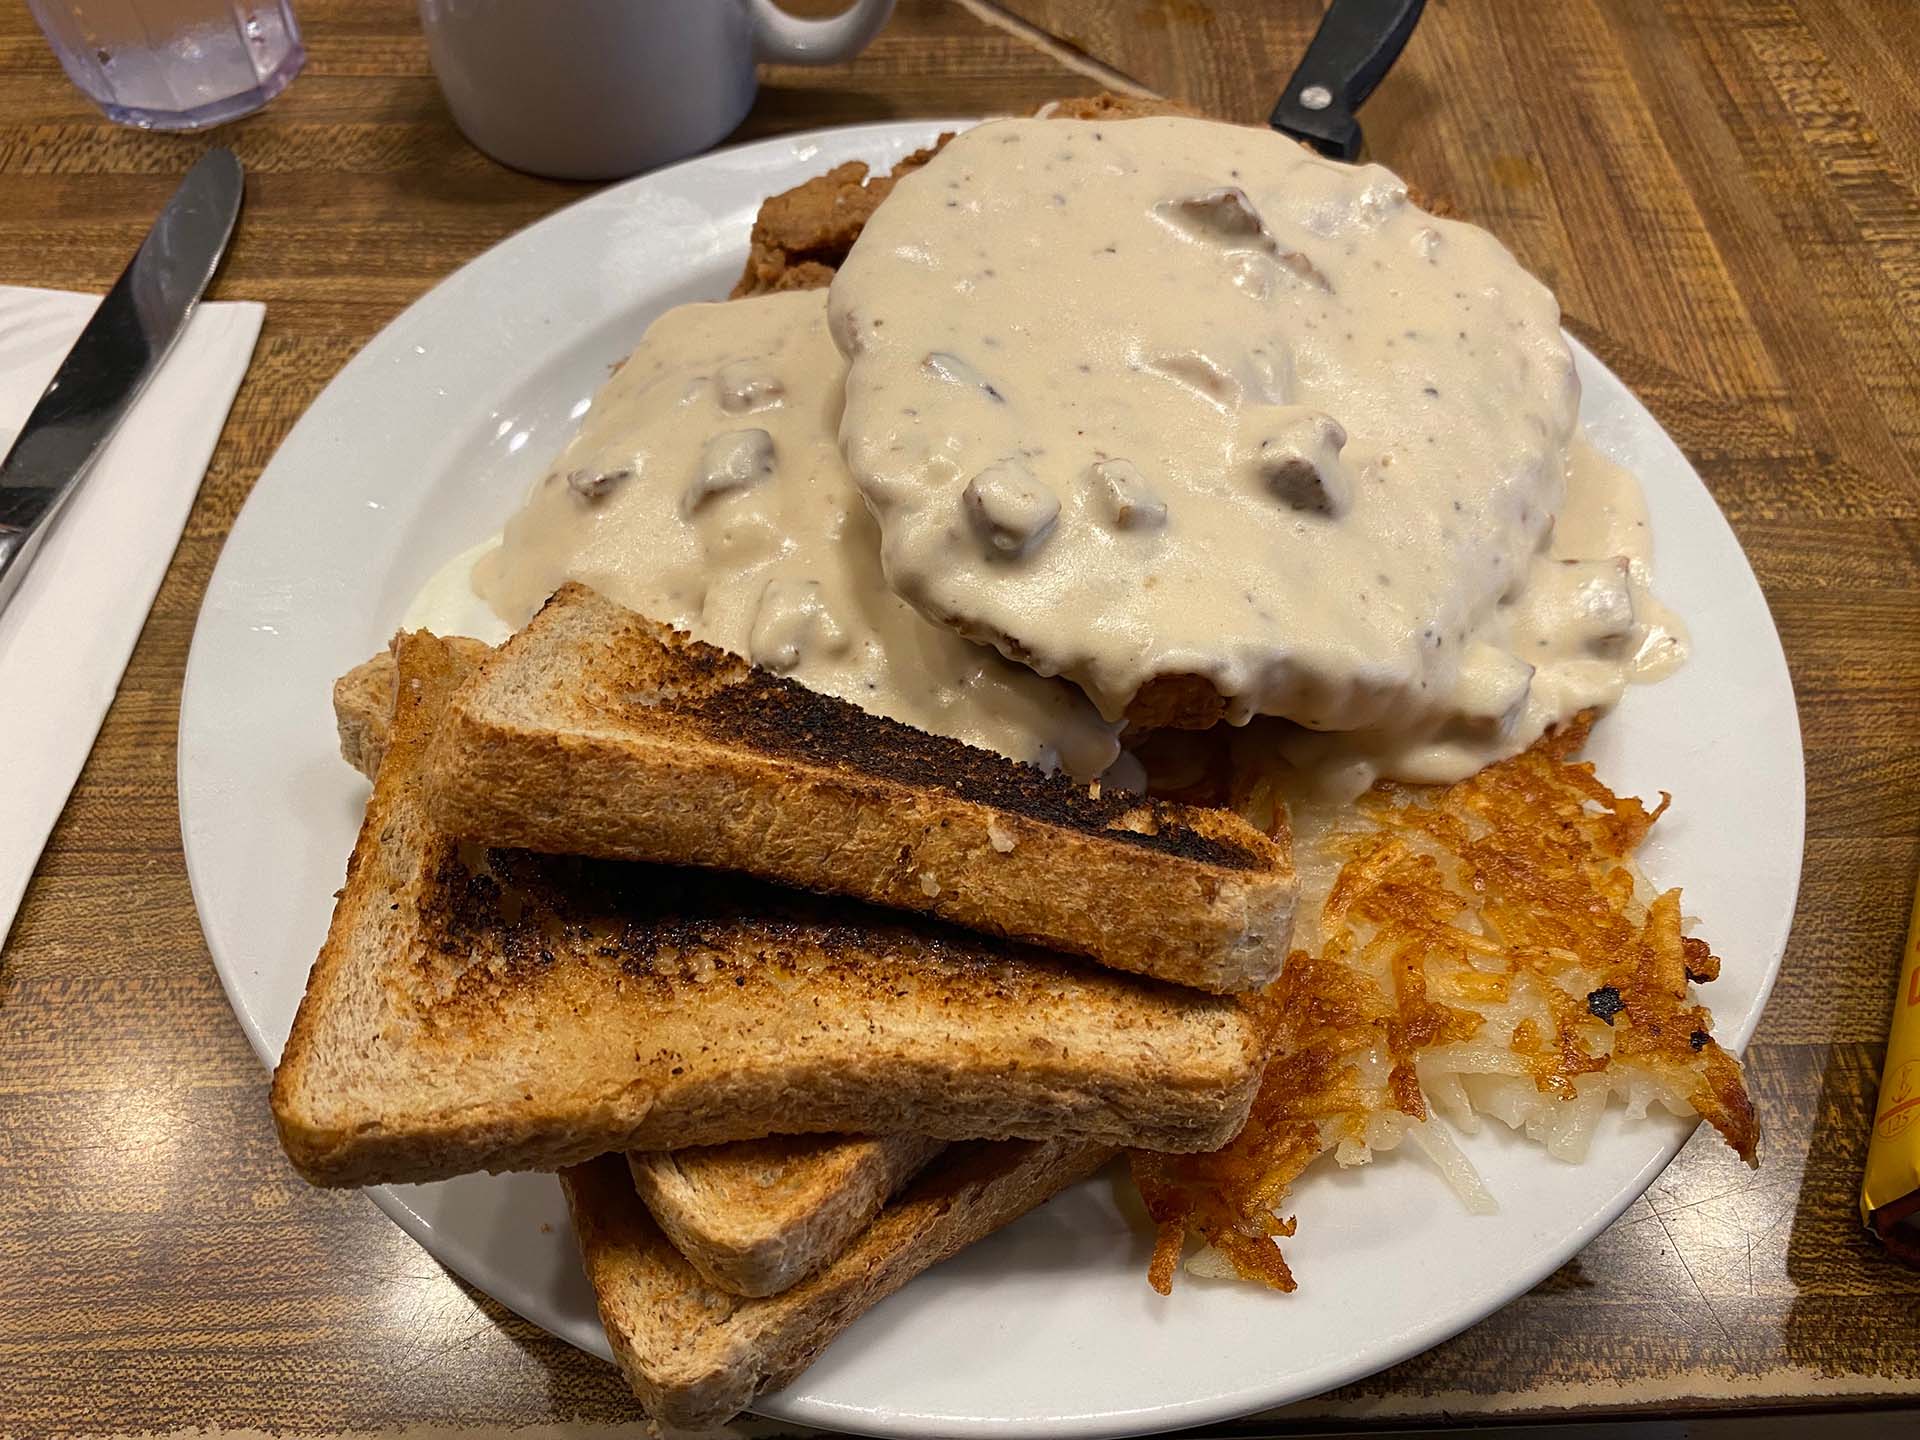 A plate of chicken fried steak, toast and hash browns.